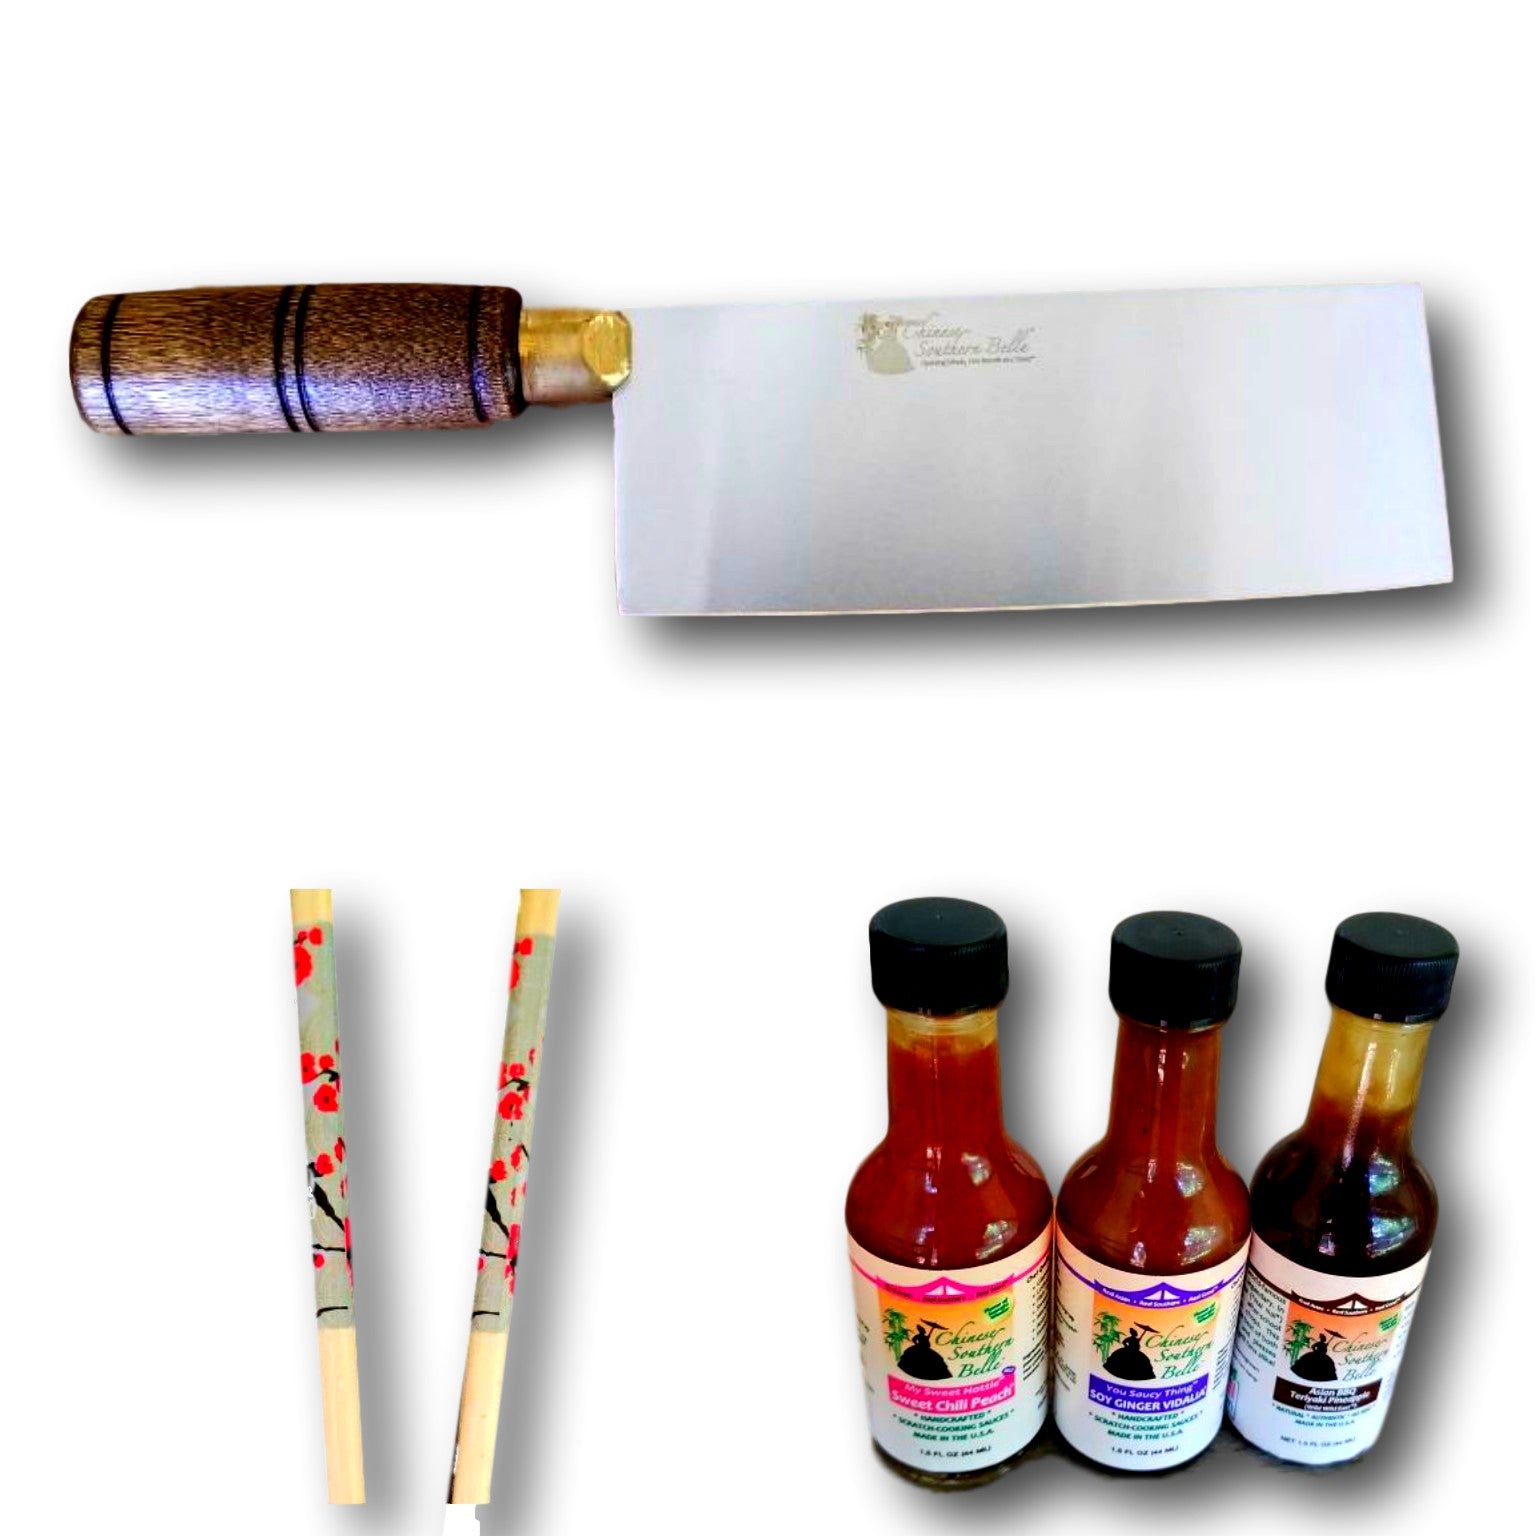 Chef Cleaver, Knife, Sauces and Chopsticks Gift Set